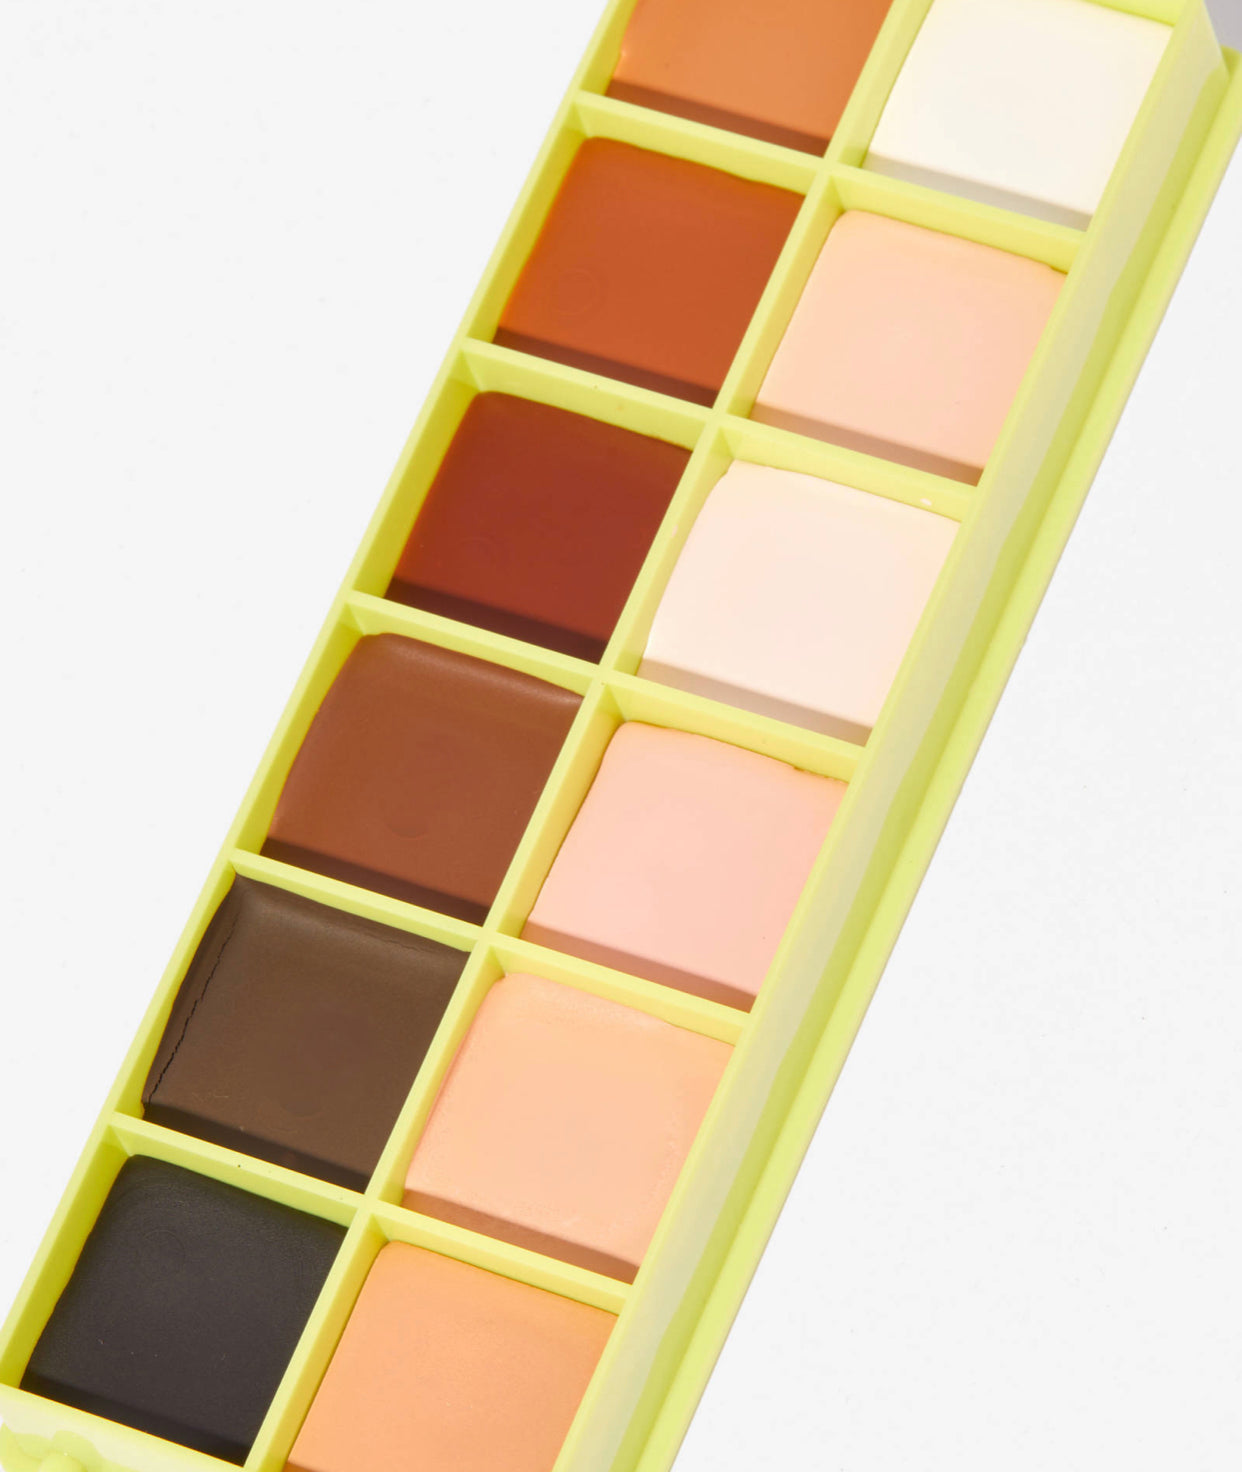 MADE BY MITCHELL, COLOUR CASE COSMETIC PAINT PALETTE THE ESSENTIALS